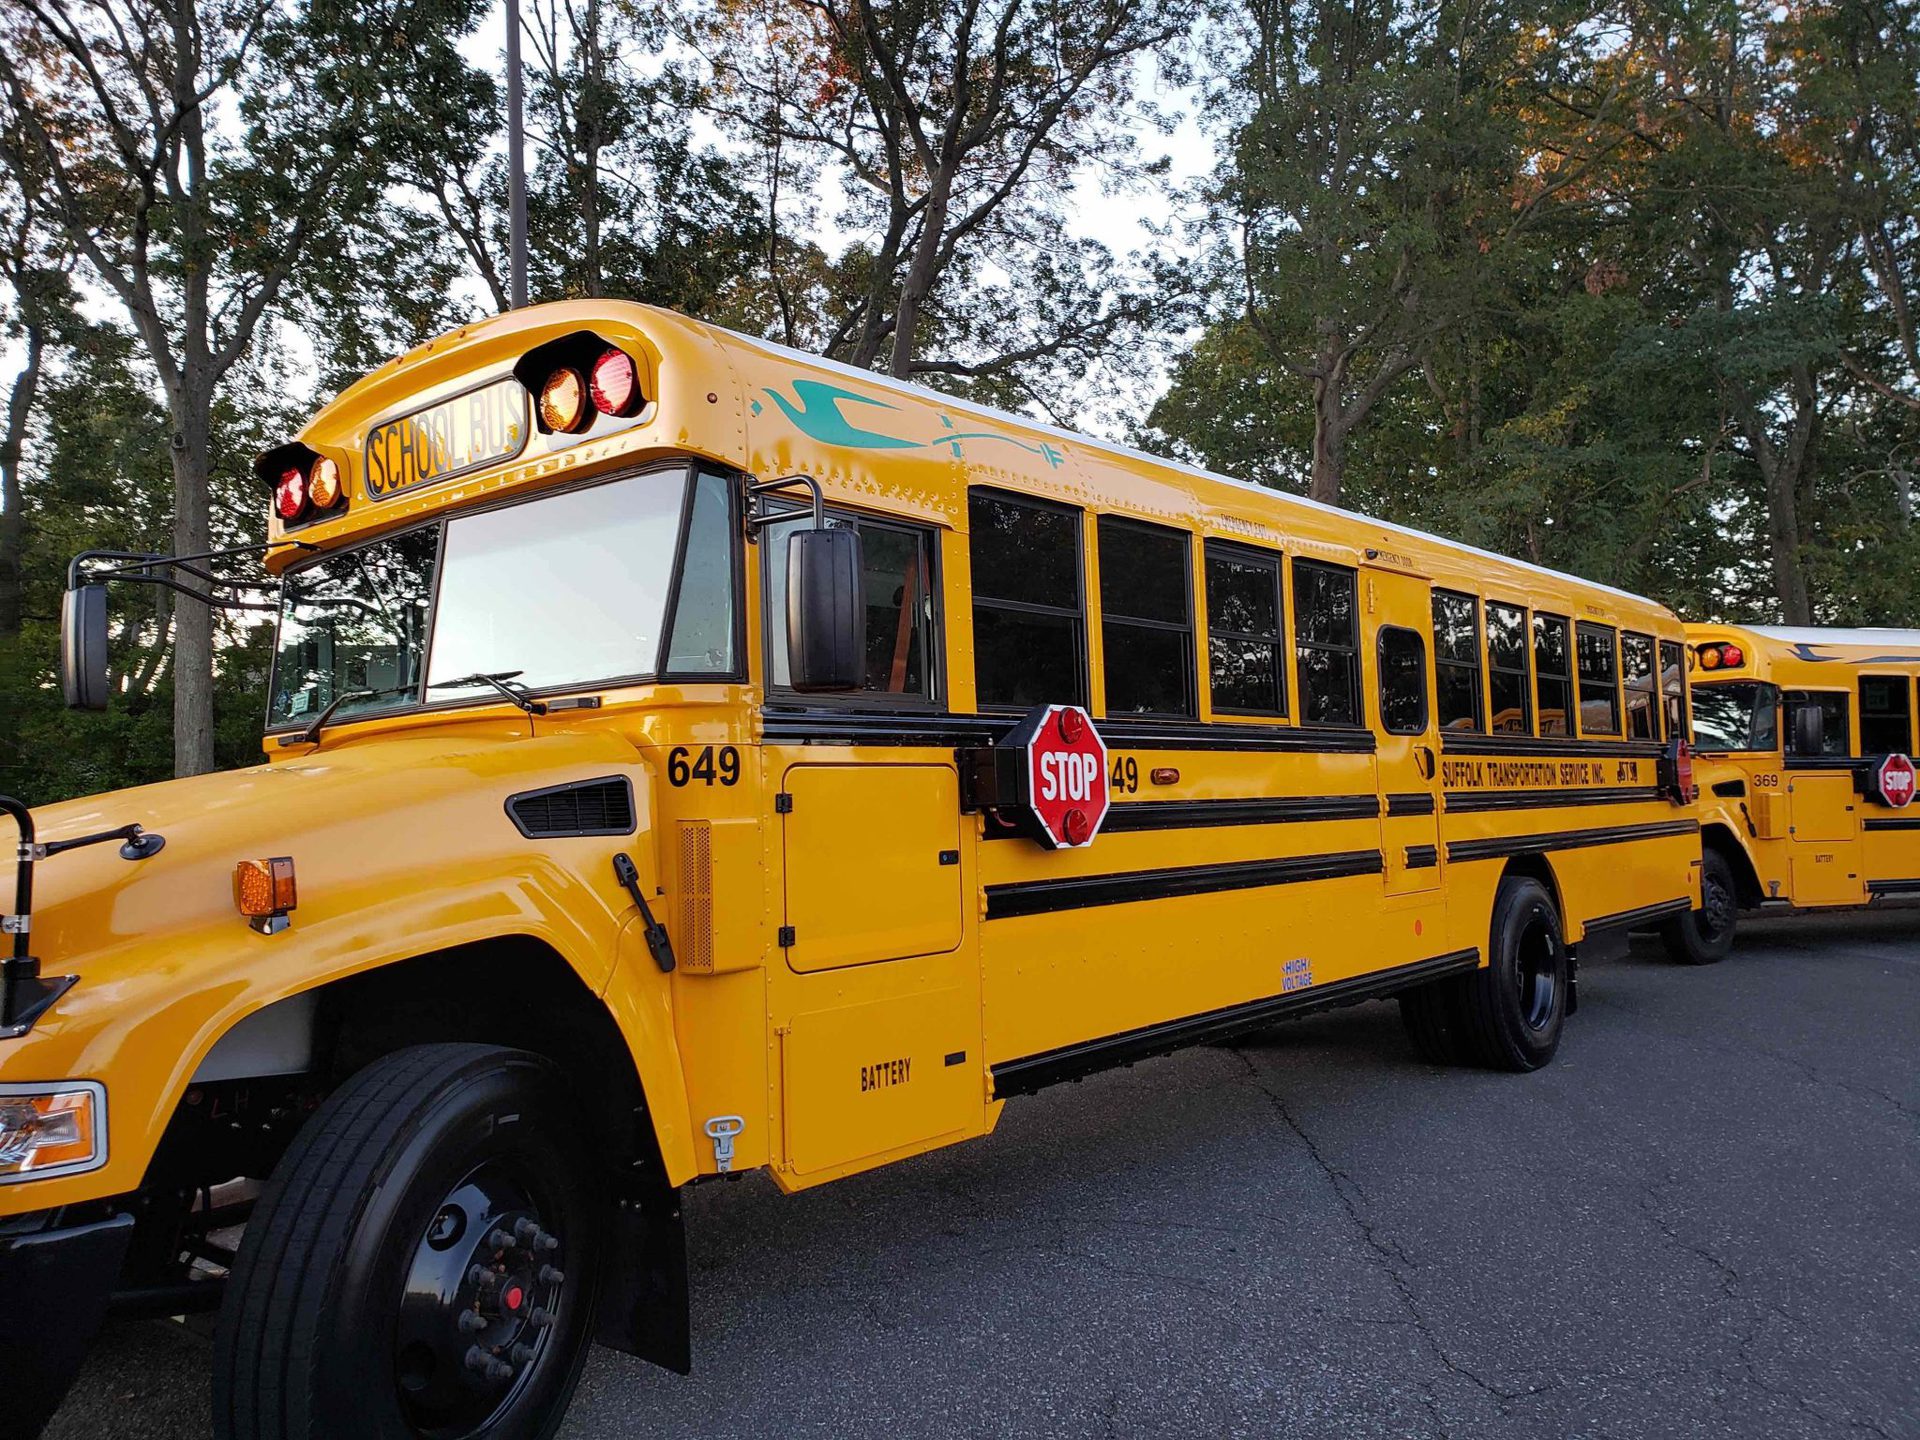 EPA Grant Brings 4 Blue Bird Electric School Buses to New York District